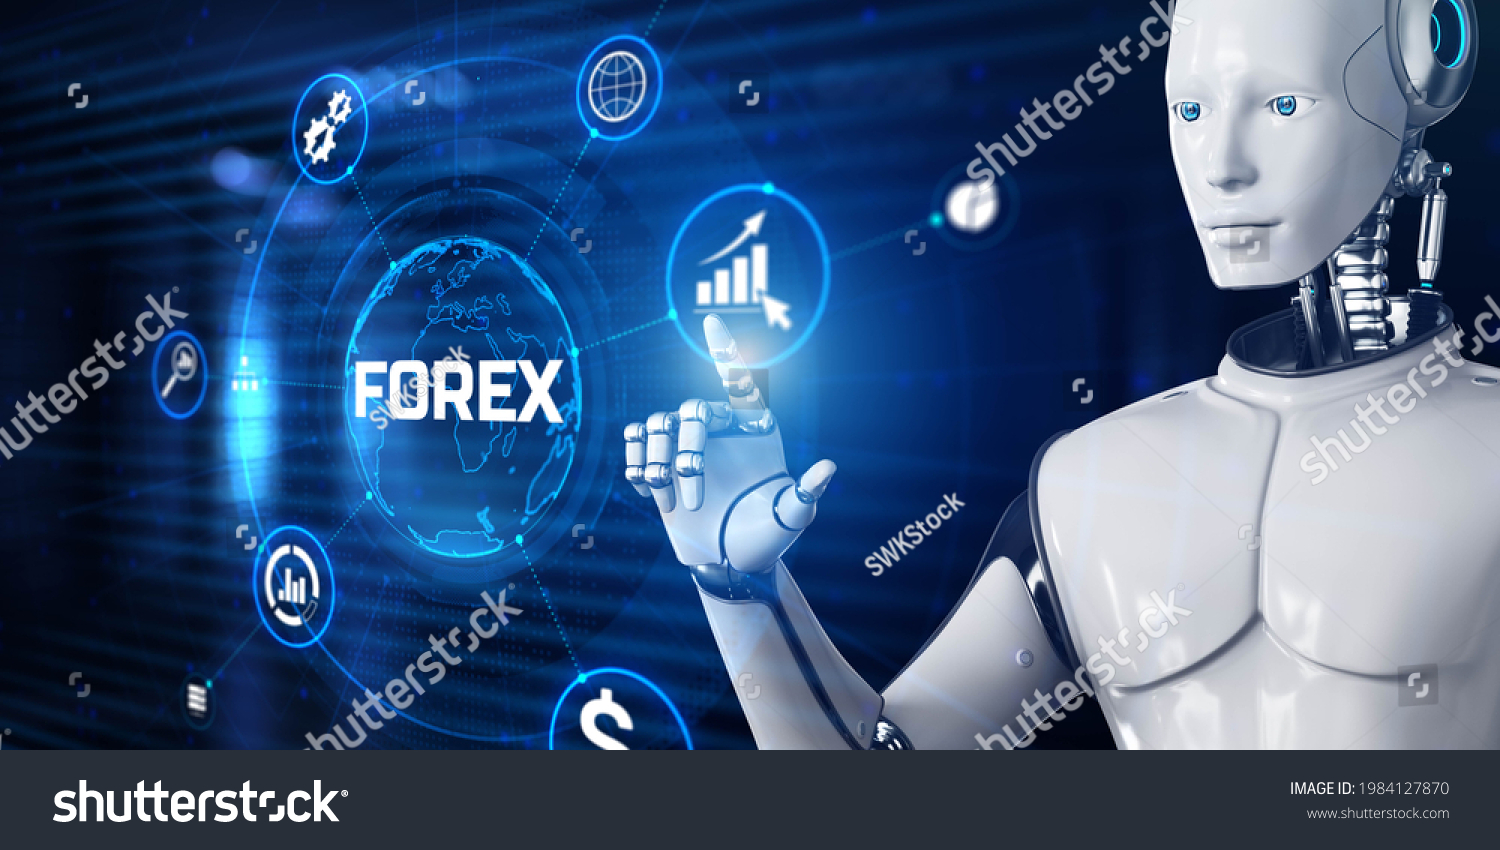 The best forex robot 2022 nfl apple cup 2022 betting line